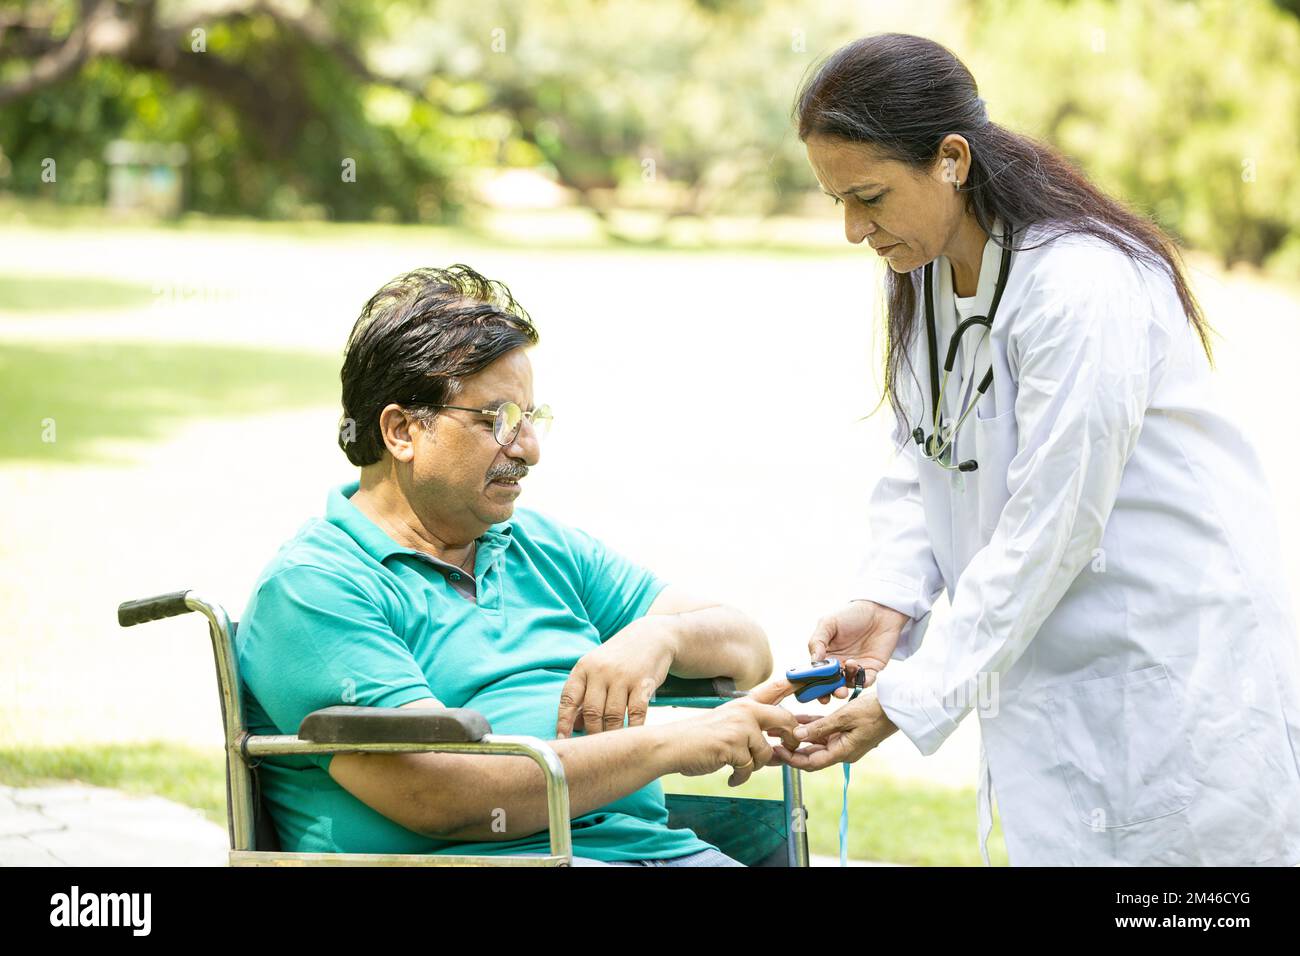 Indian doctor check with pulse oximeter device on finger of senior male diabetes patient in a wheelchair outdoor at park. Stock Photo